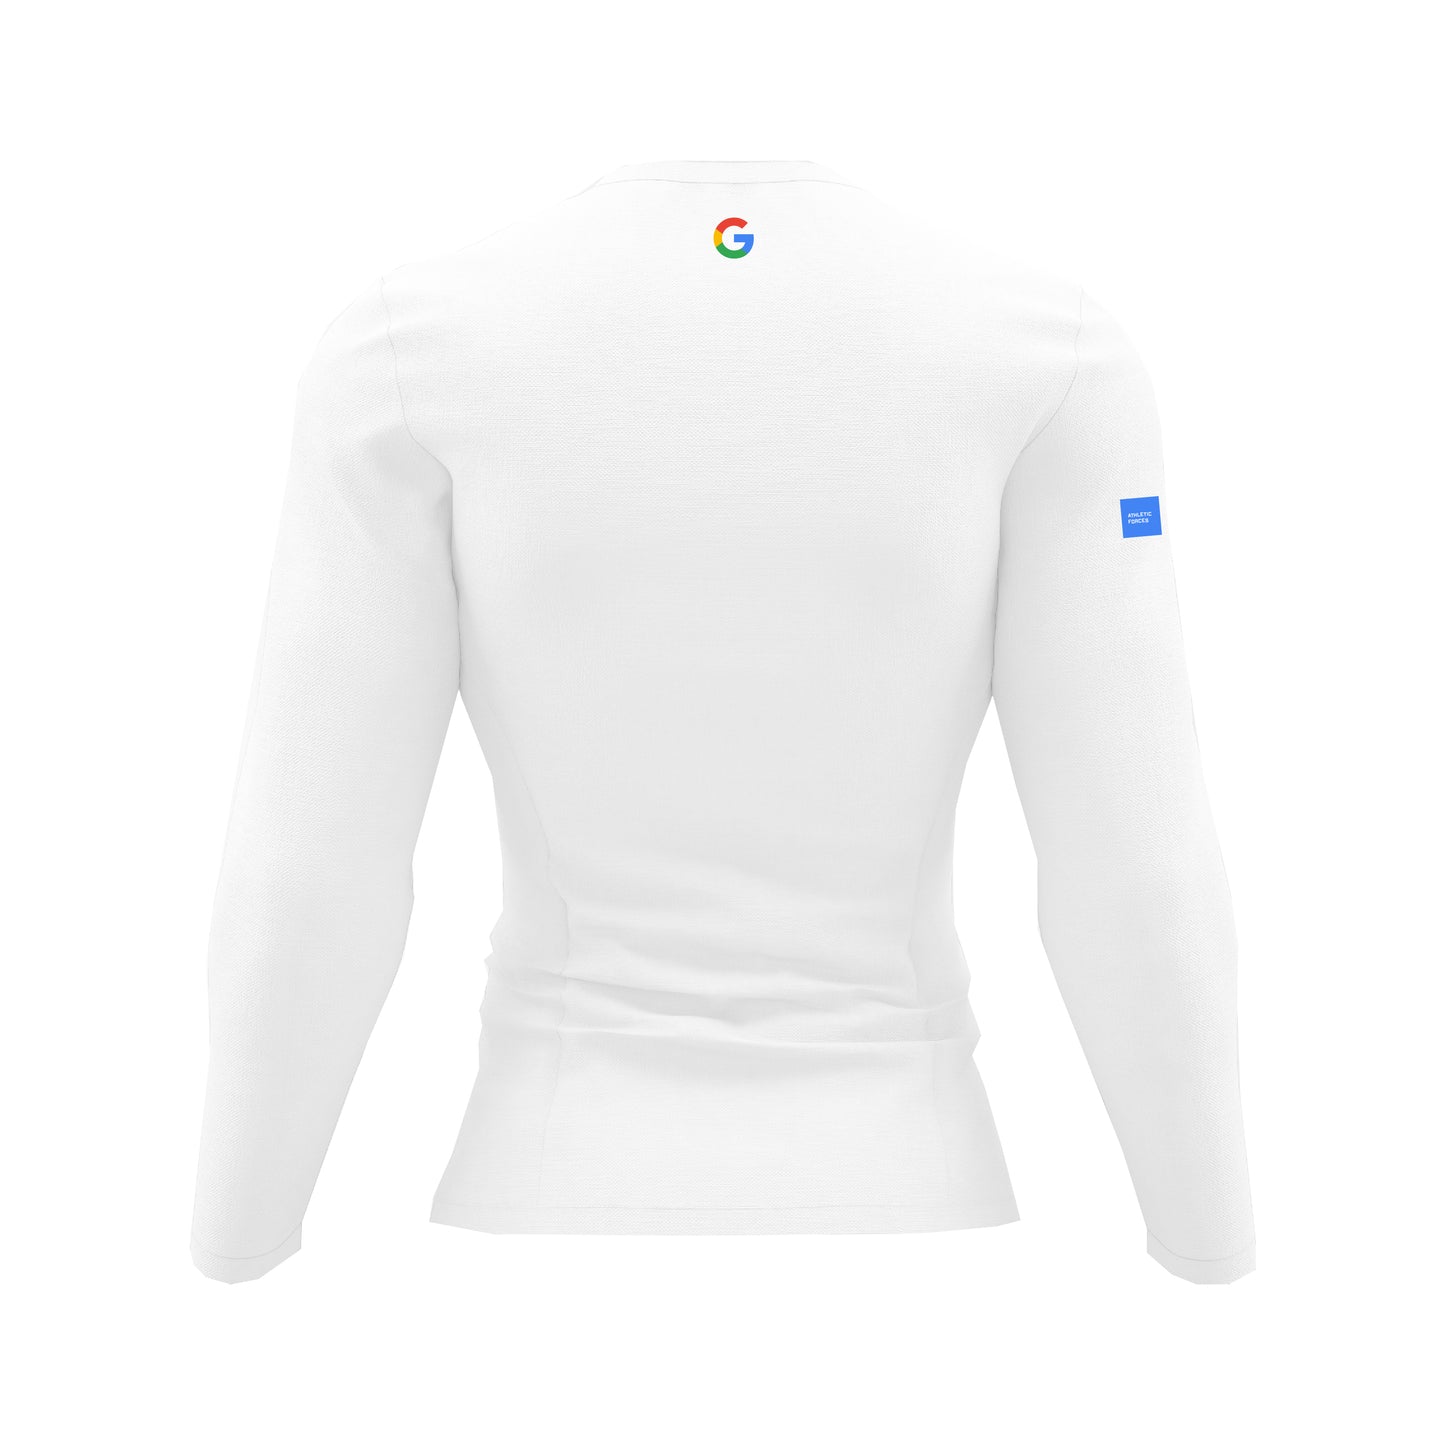 Google - Union of Forces ® Sweatshirt by Athletic Forces -  Model 3